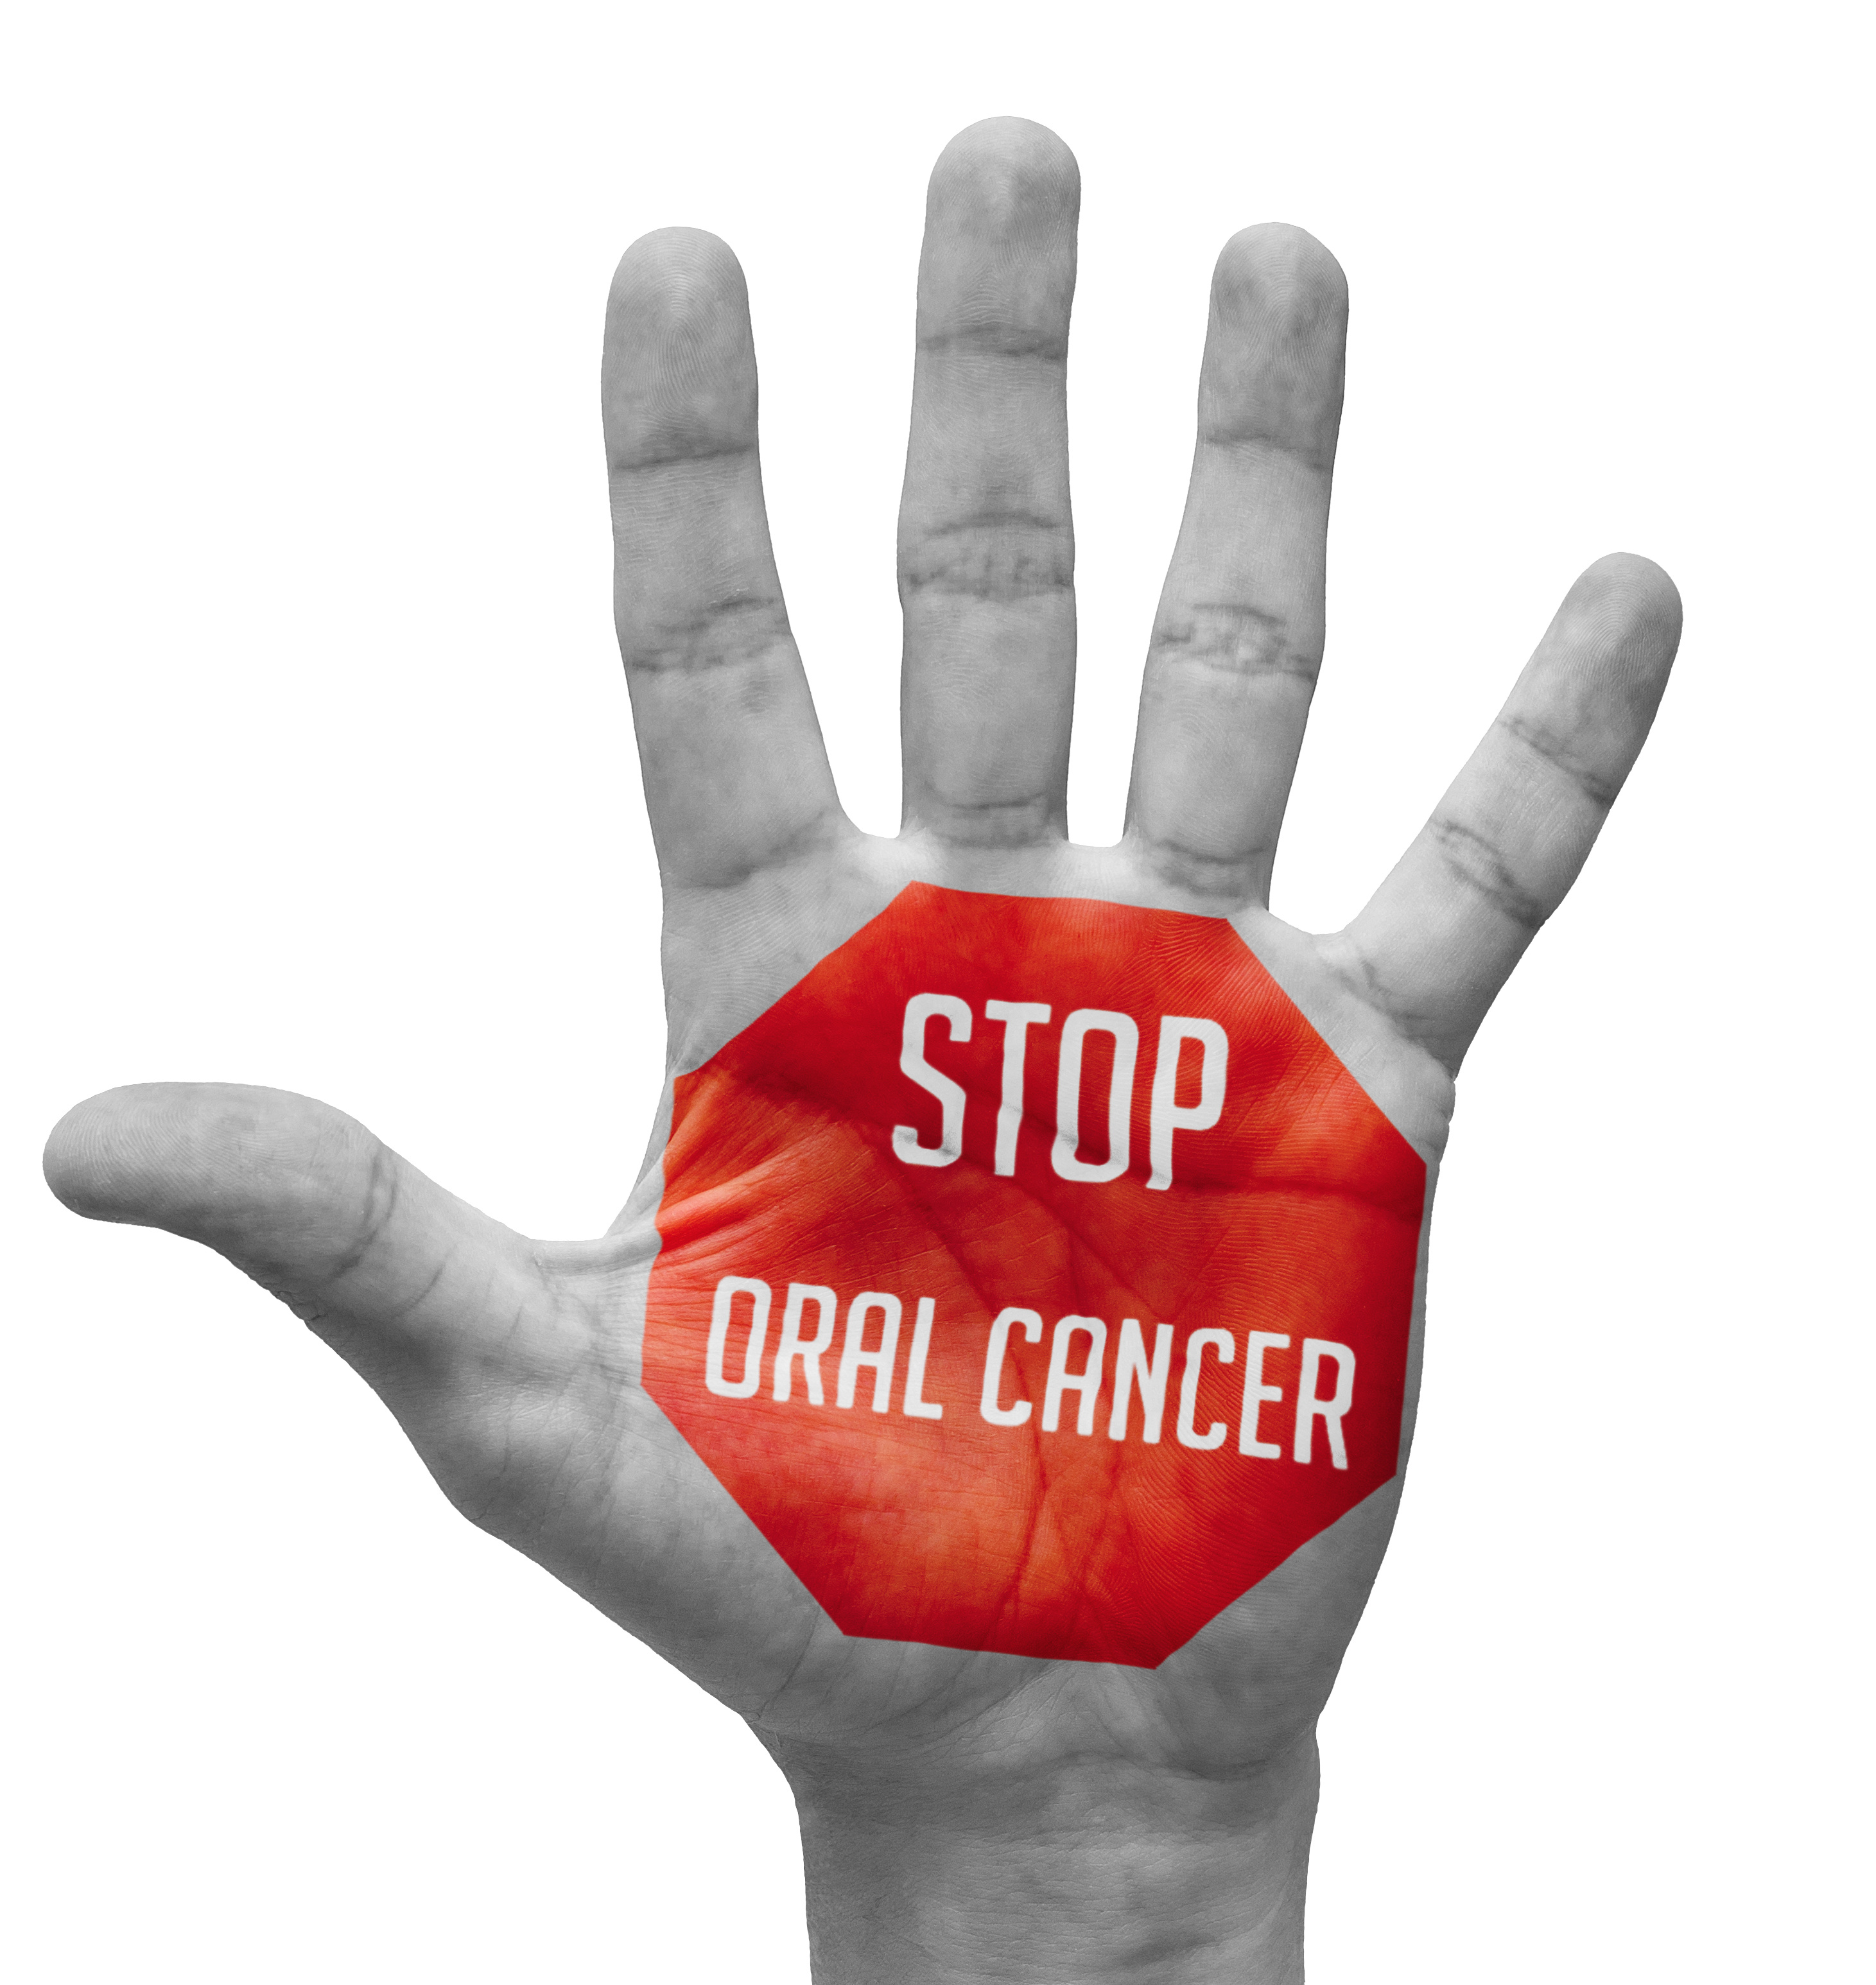 Stop Oral Cancer on Open Hand.